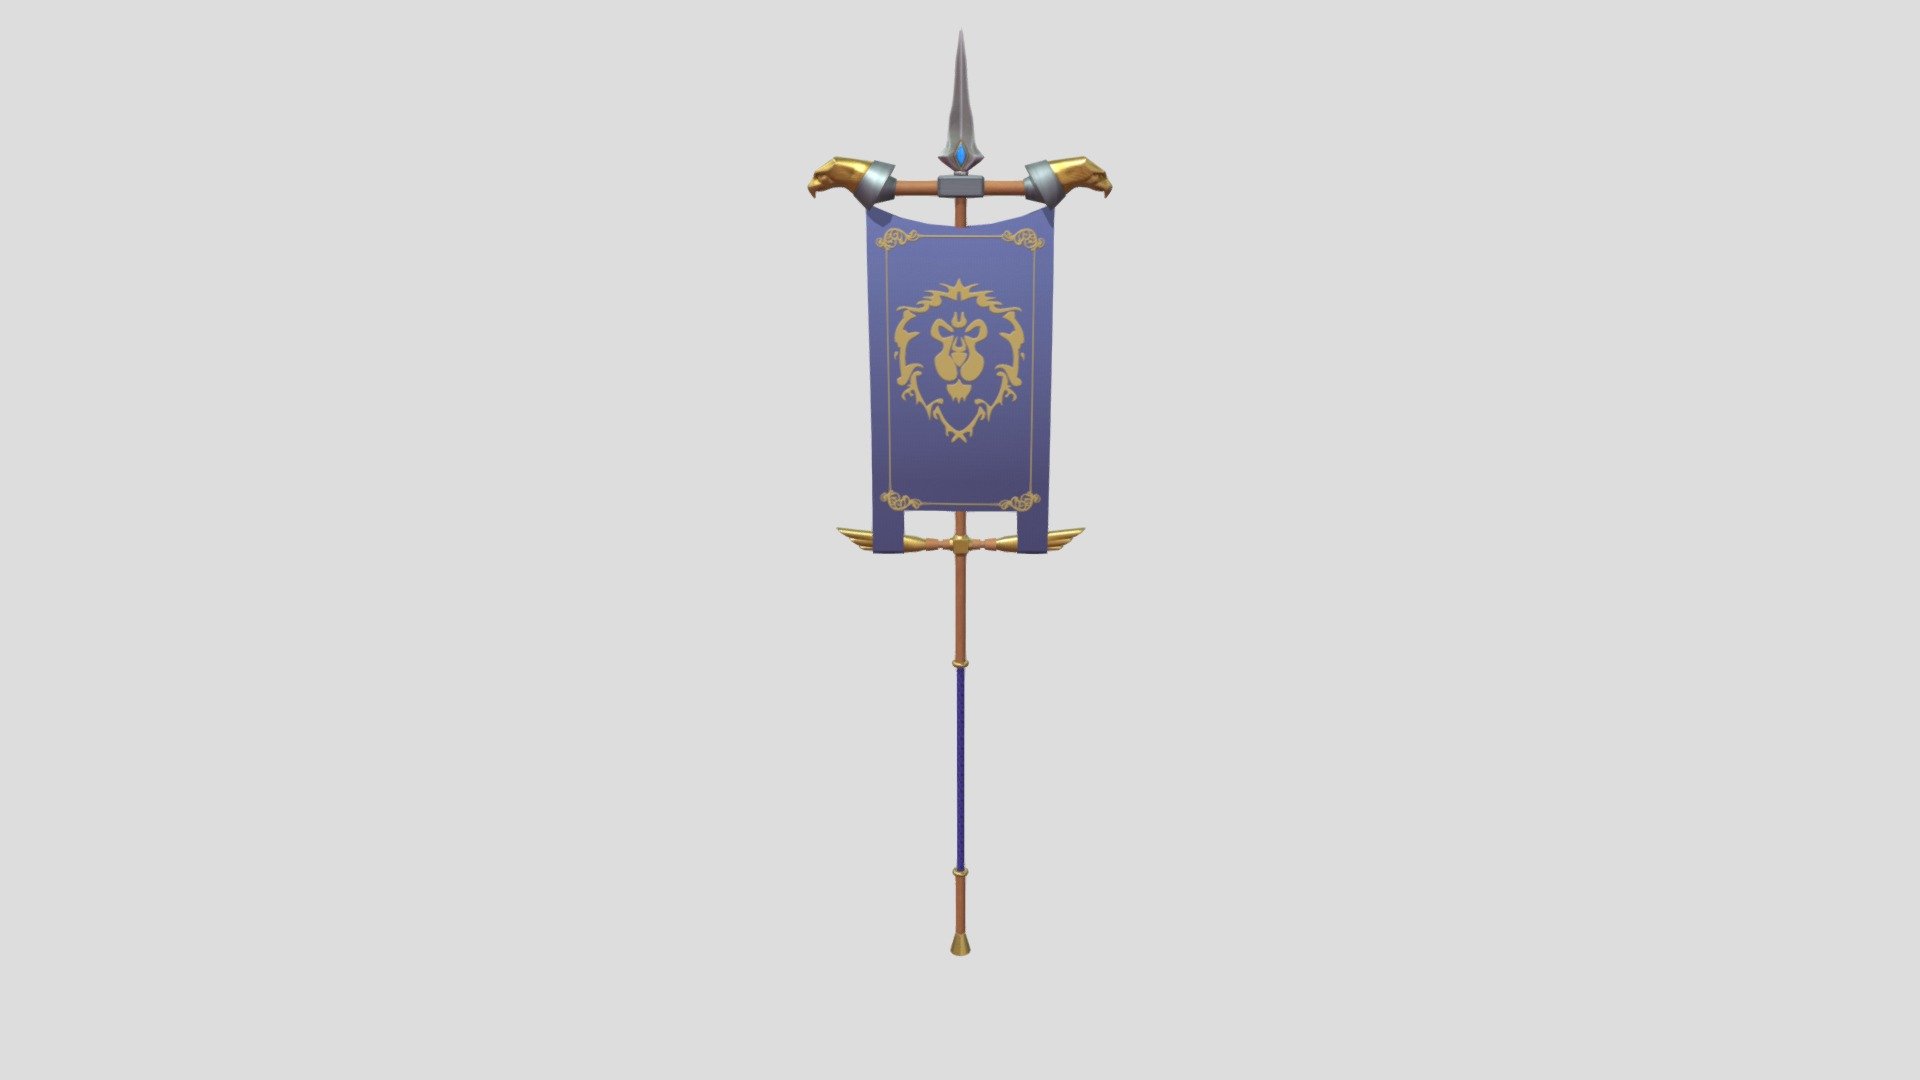 Quick project testing stylized materials. Original design source : https://steamcommunity.com/sharedfiles/filedetails/?id=1812892174

Made in Autodesk Maya and Substance Painter - Alliance Banner (WoW) - 3D model by Mordillo (@C.Mordillo.P) 3d model